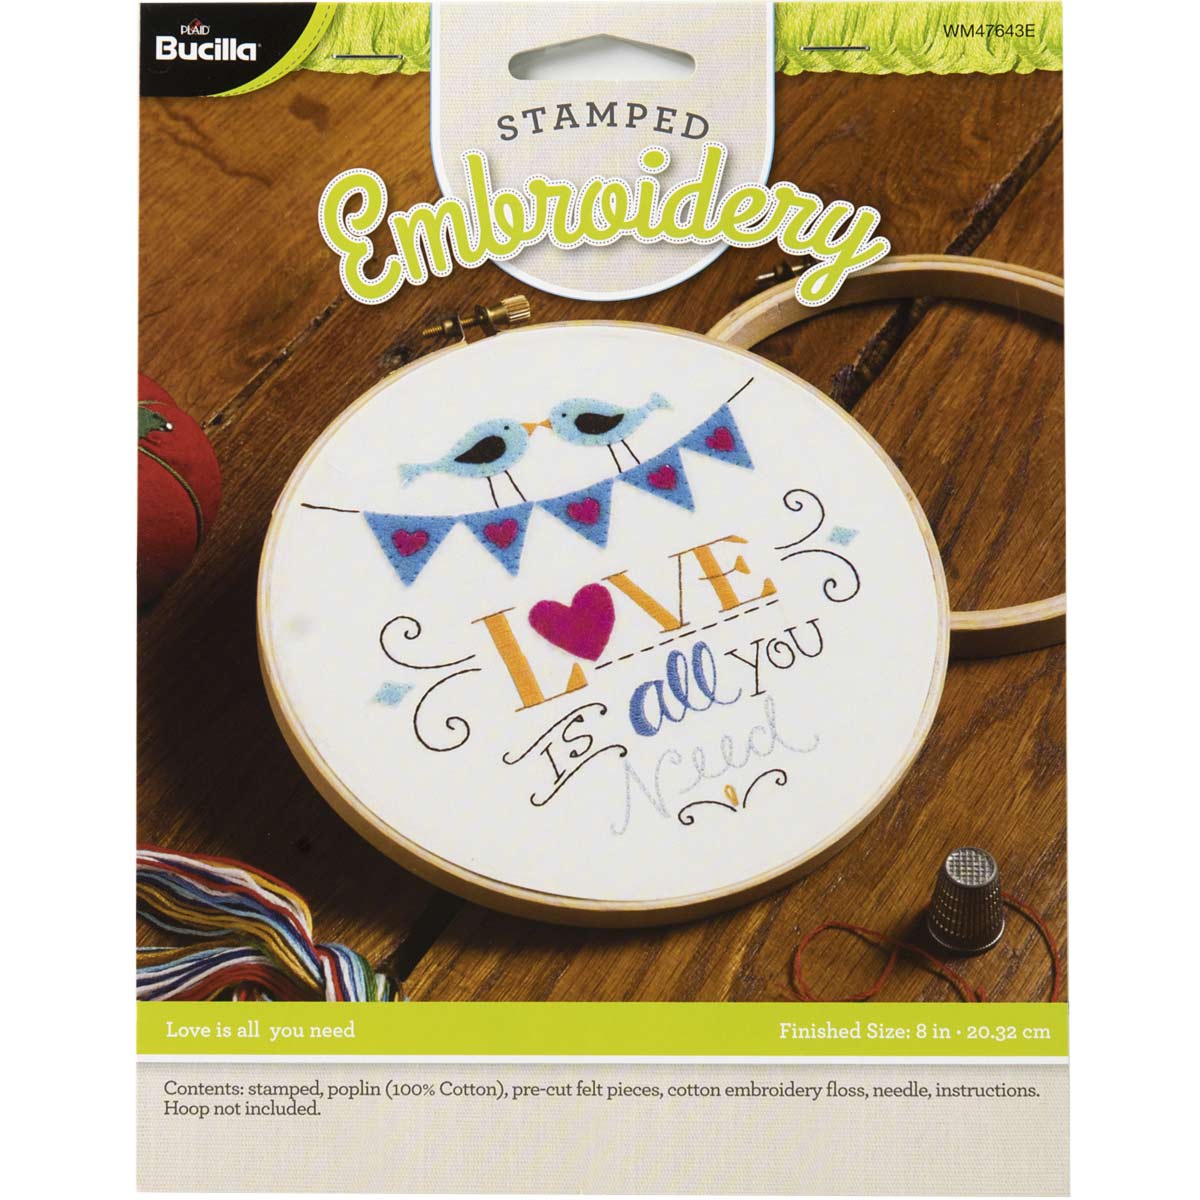 Bucilla ® Stamped Embroidery - Love is All You Need - WM47643E